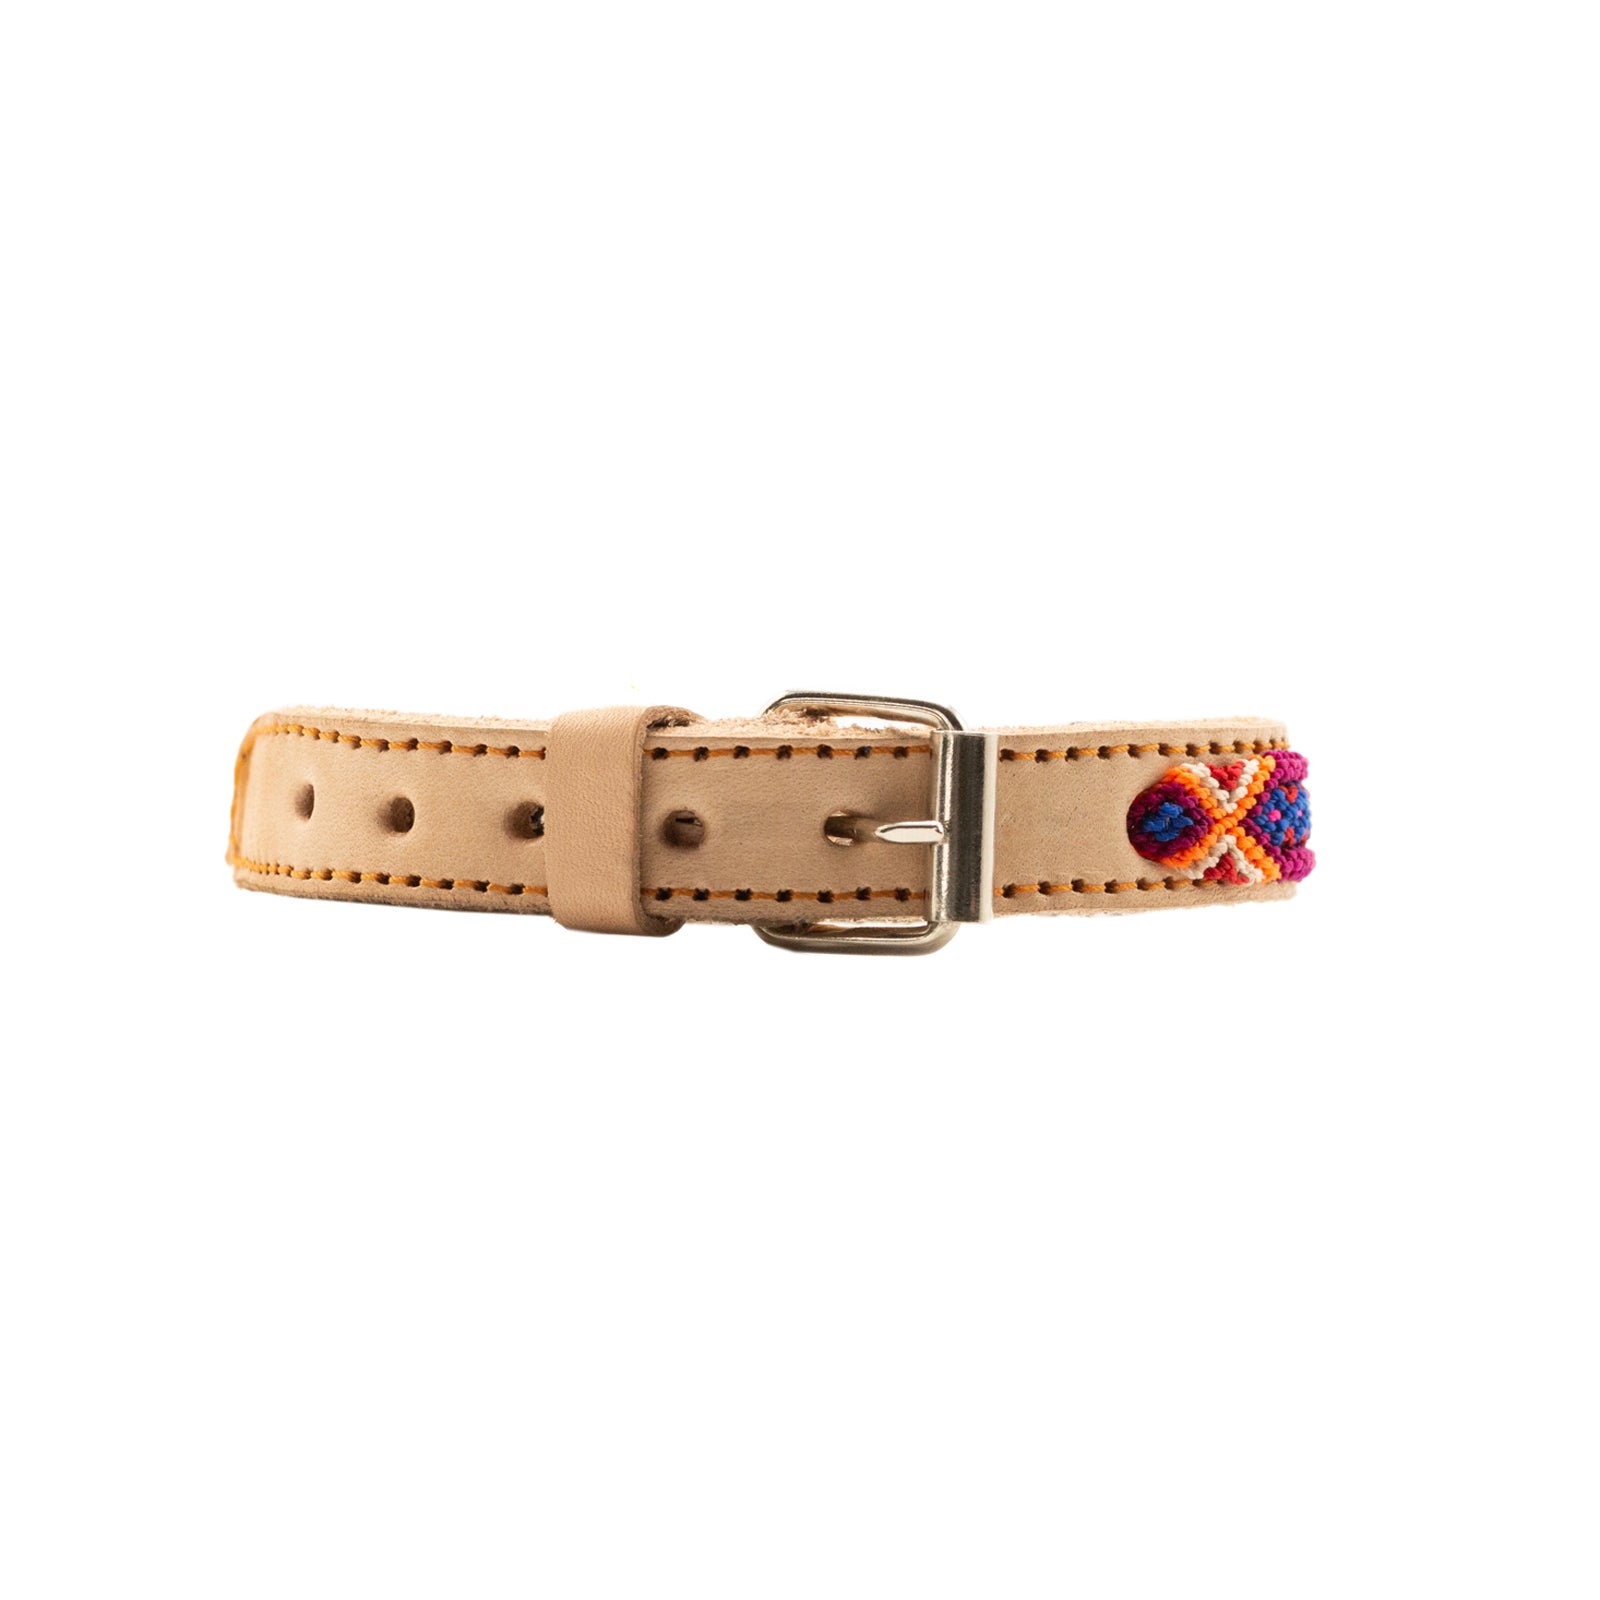 Unique pet accessory: leather collar with colorful silk thread embellishments